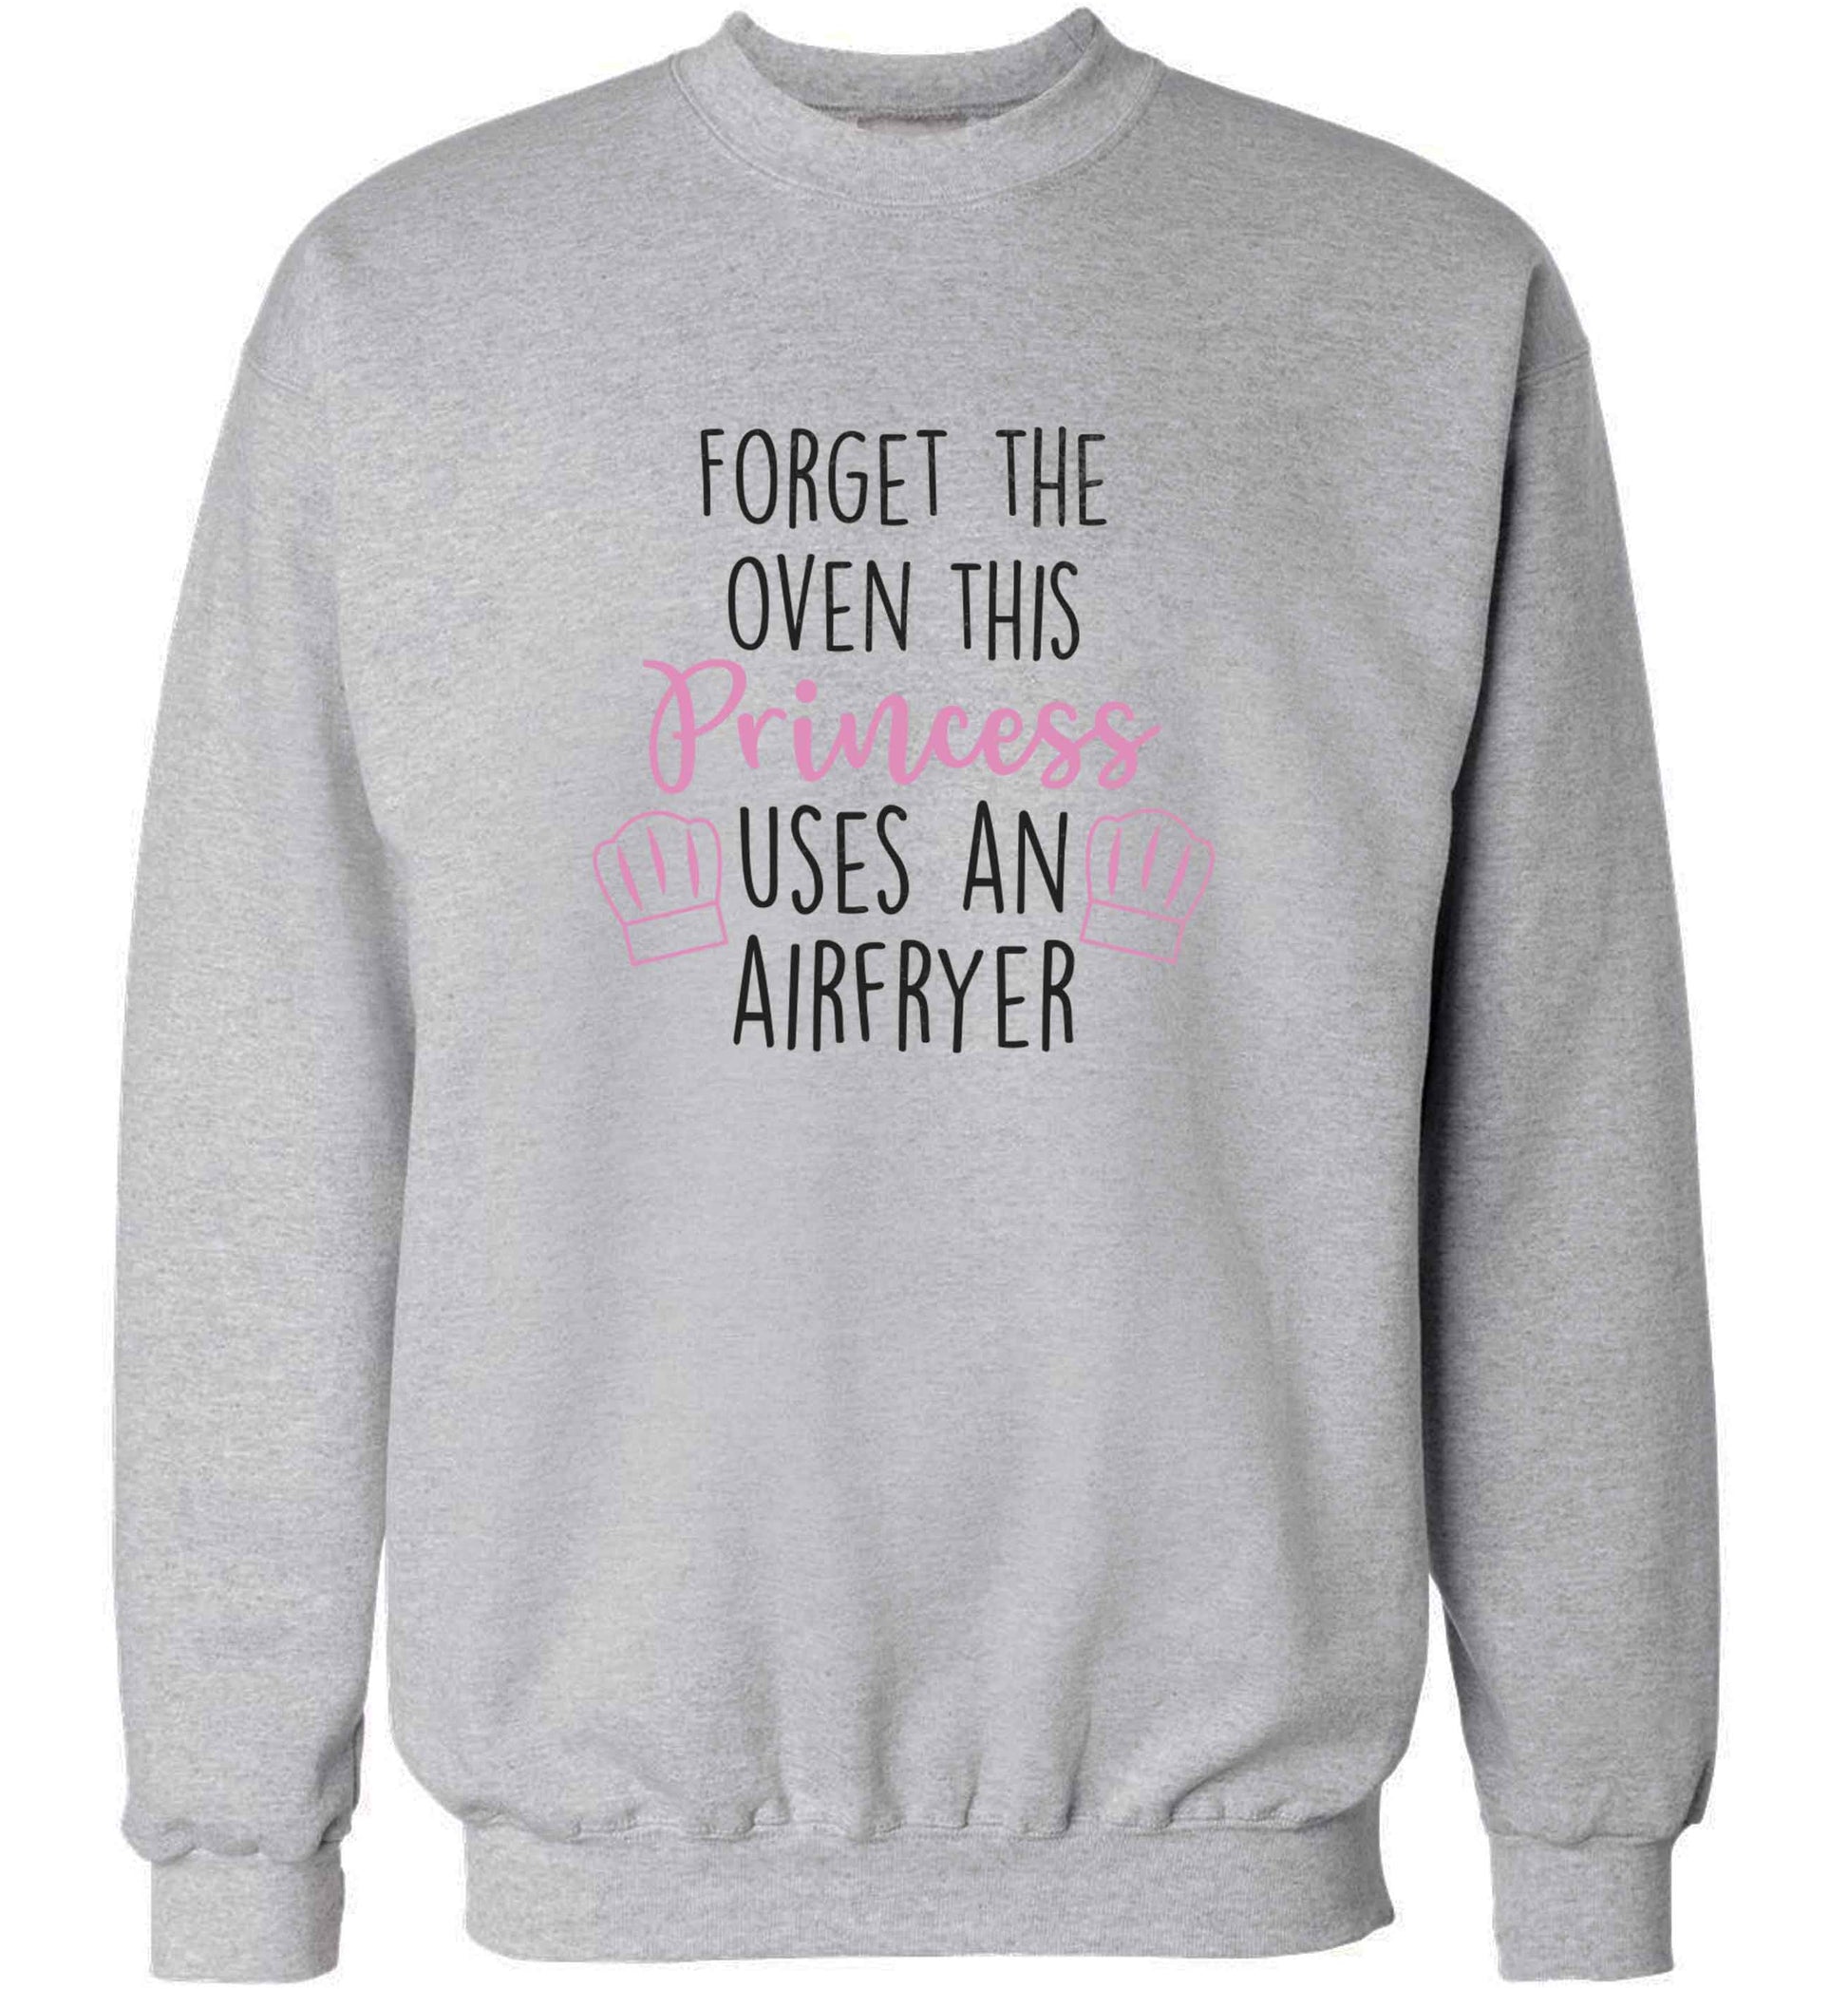 Forget the oven this princess uses an airfryeradult's unisex grey sweater 2XL